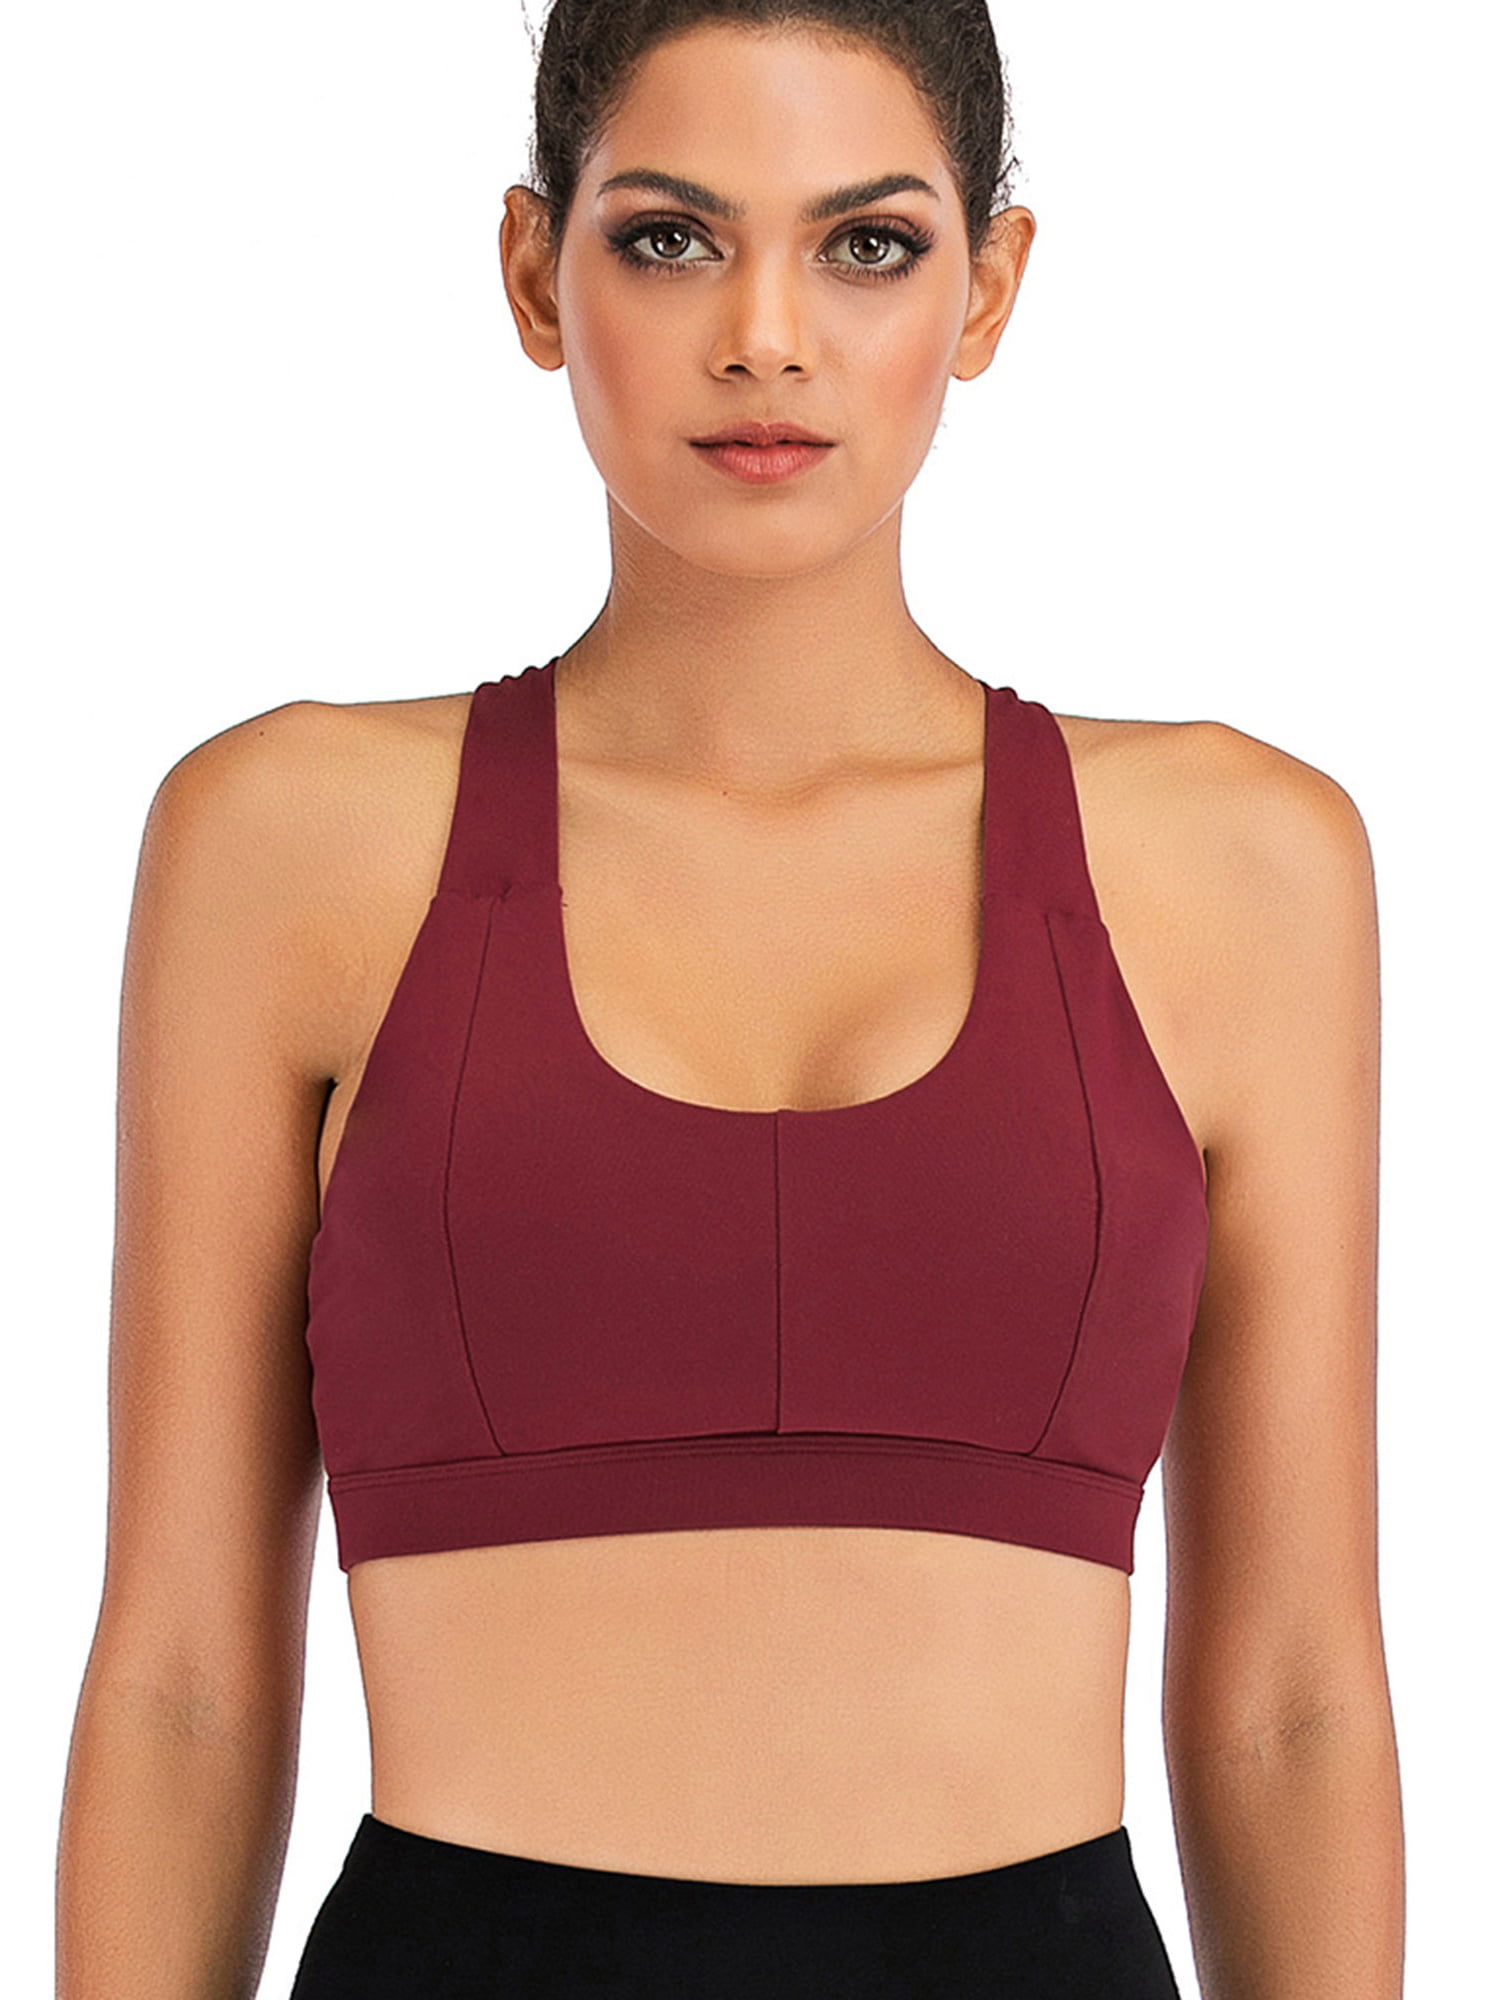 FANNYC Women's Yoga Criss Cross Back Sports Bra Medium Support Impact  Strappy Longline Sports Bras Padded Workout Yoga Running Active Gym Tank  Tops Bras With Removable Cups 